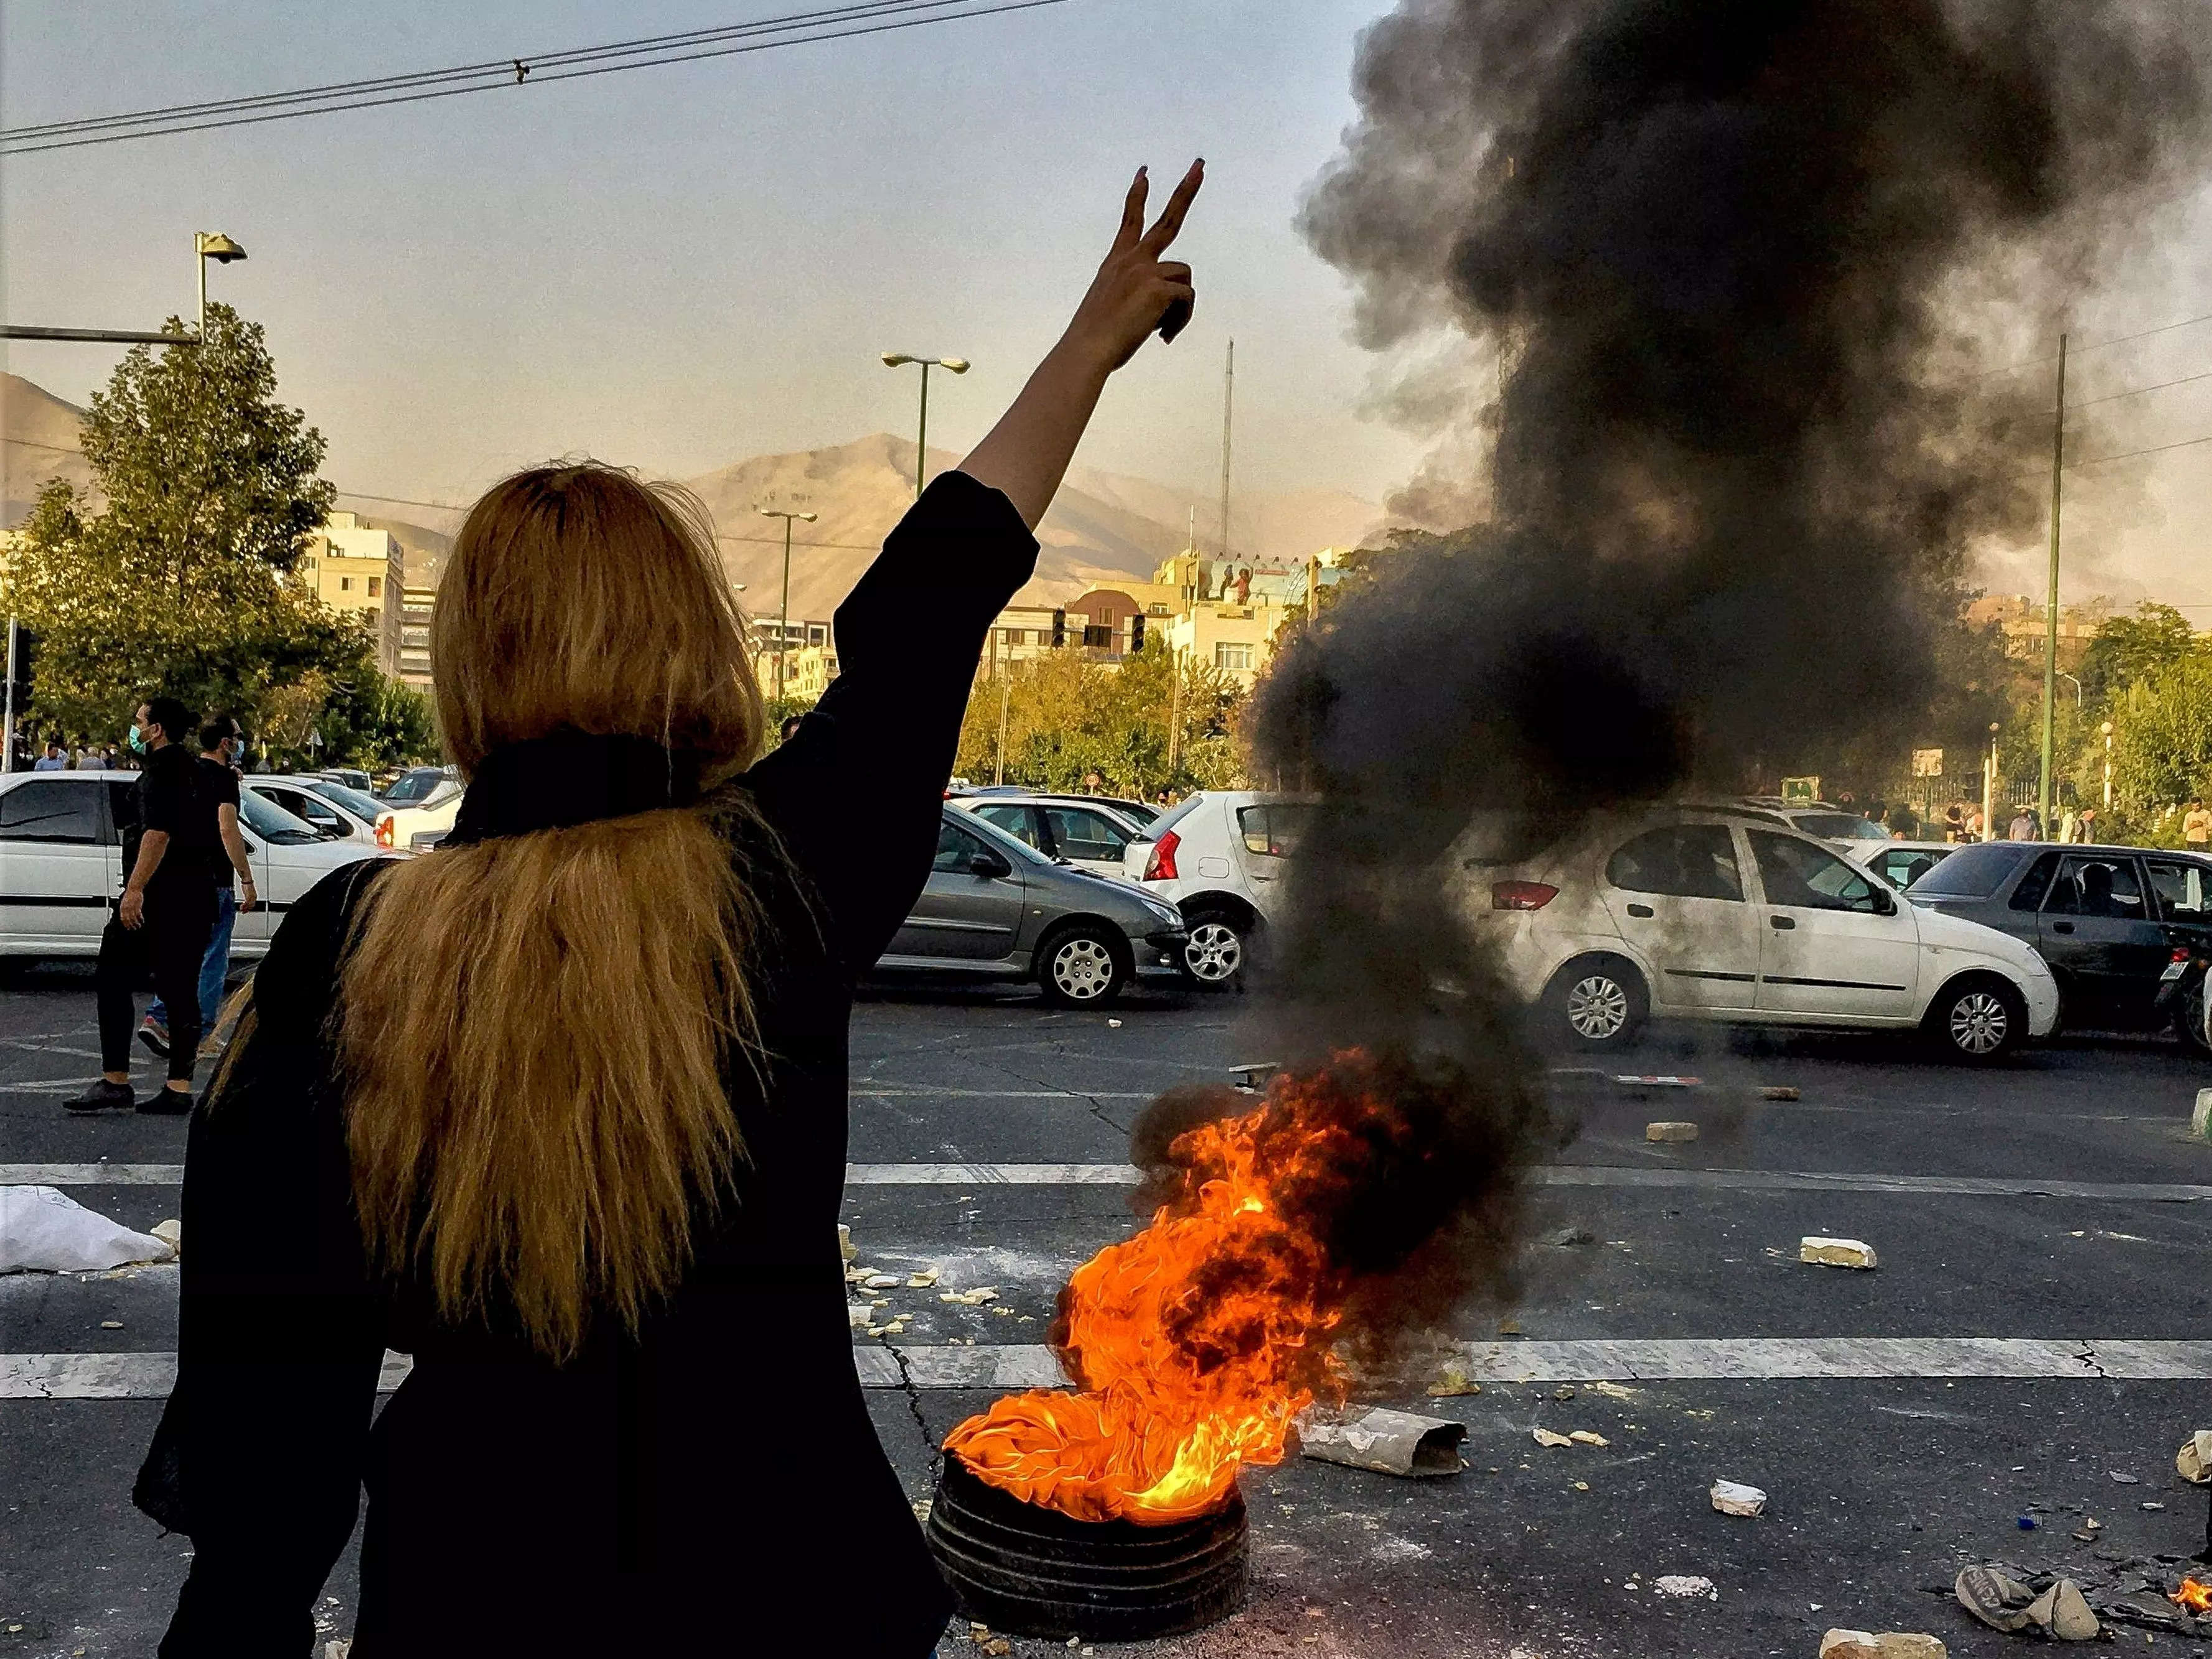 A woman holds up a "V" sign in front of a small fire during a protest in Iran.